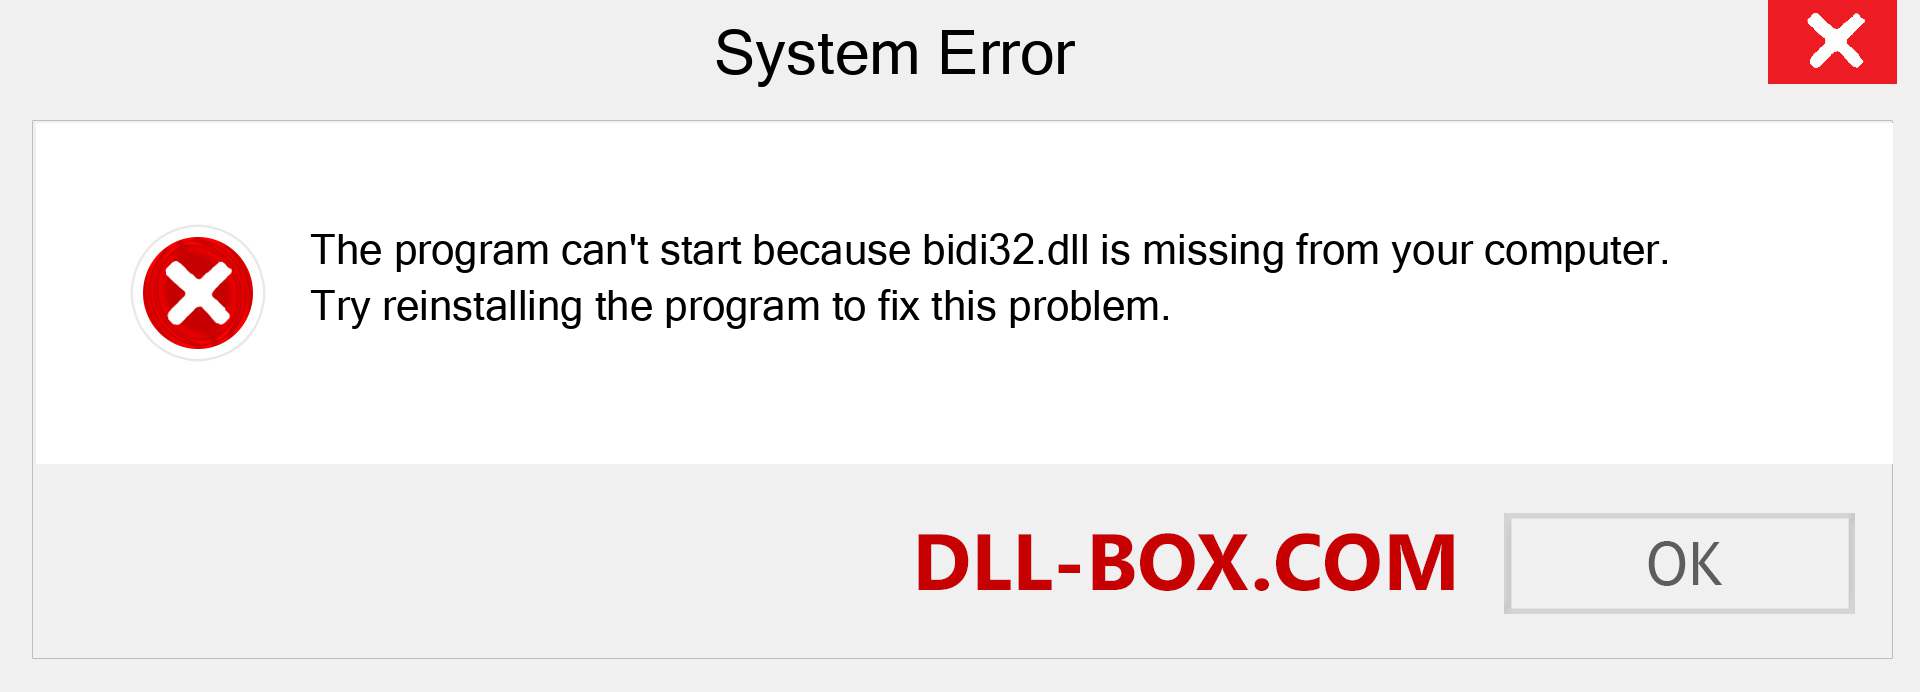  bidi32.dll file is missing?. Download for Windows 7, 8, 10 - Fix  bidi32 dll Missing Error on Windows, photos, images